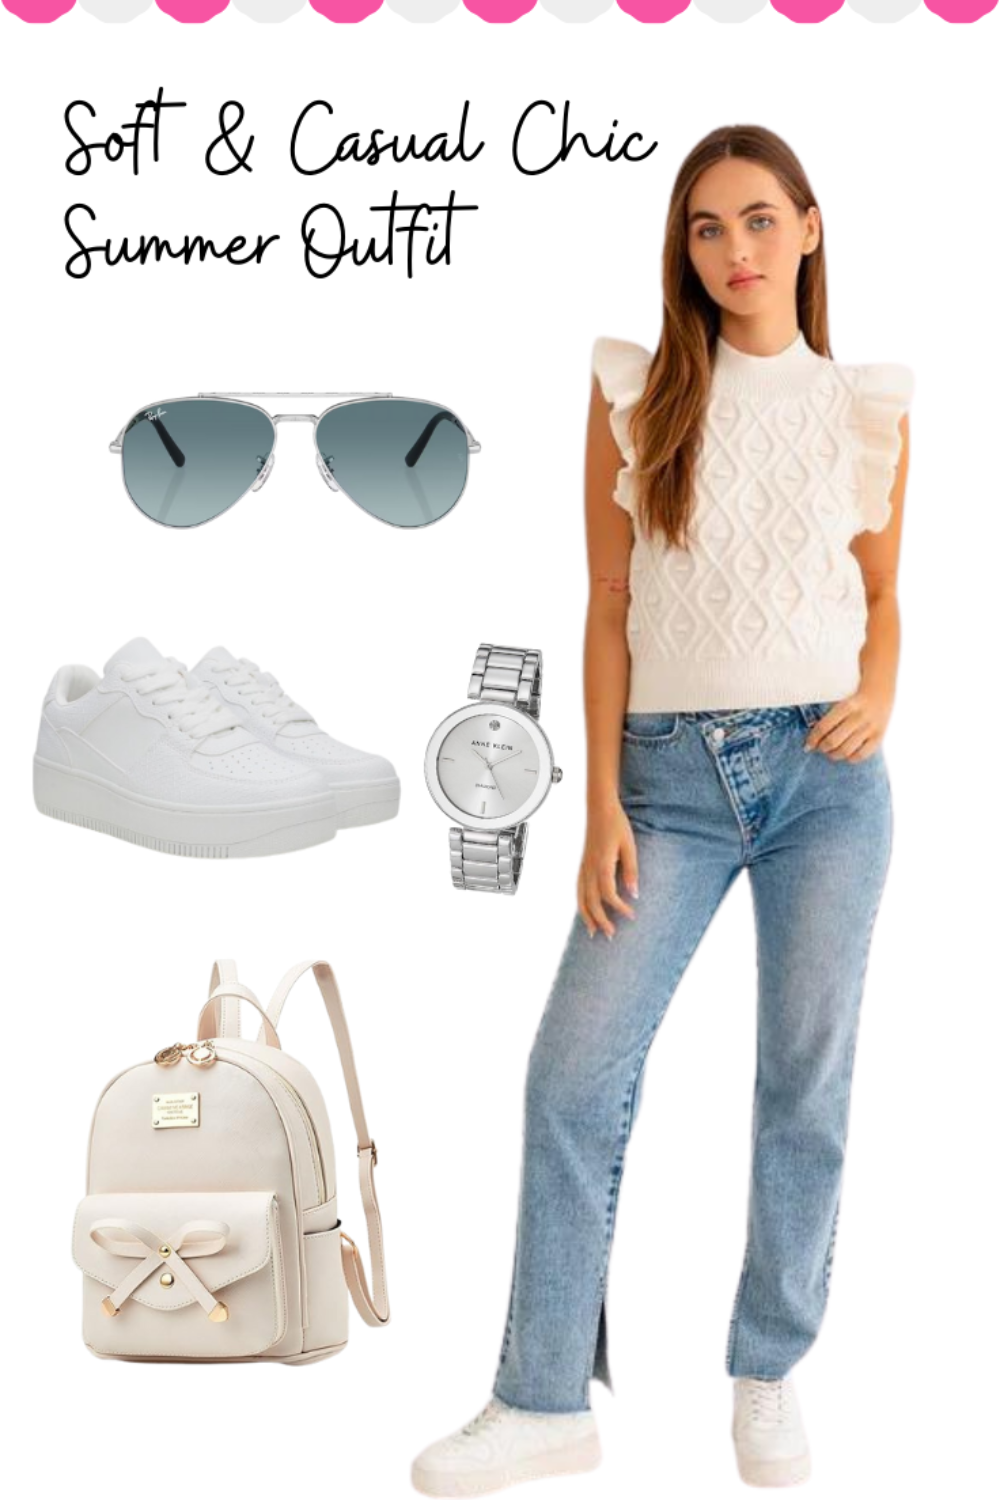 Soft & Casual Chic Summer Outfit That’s Super Practical!